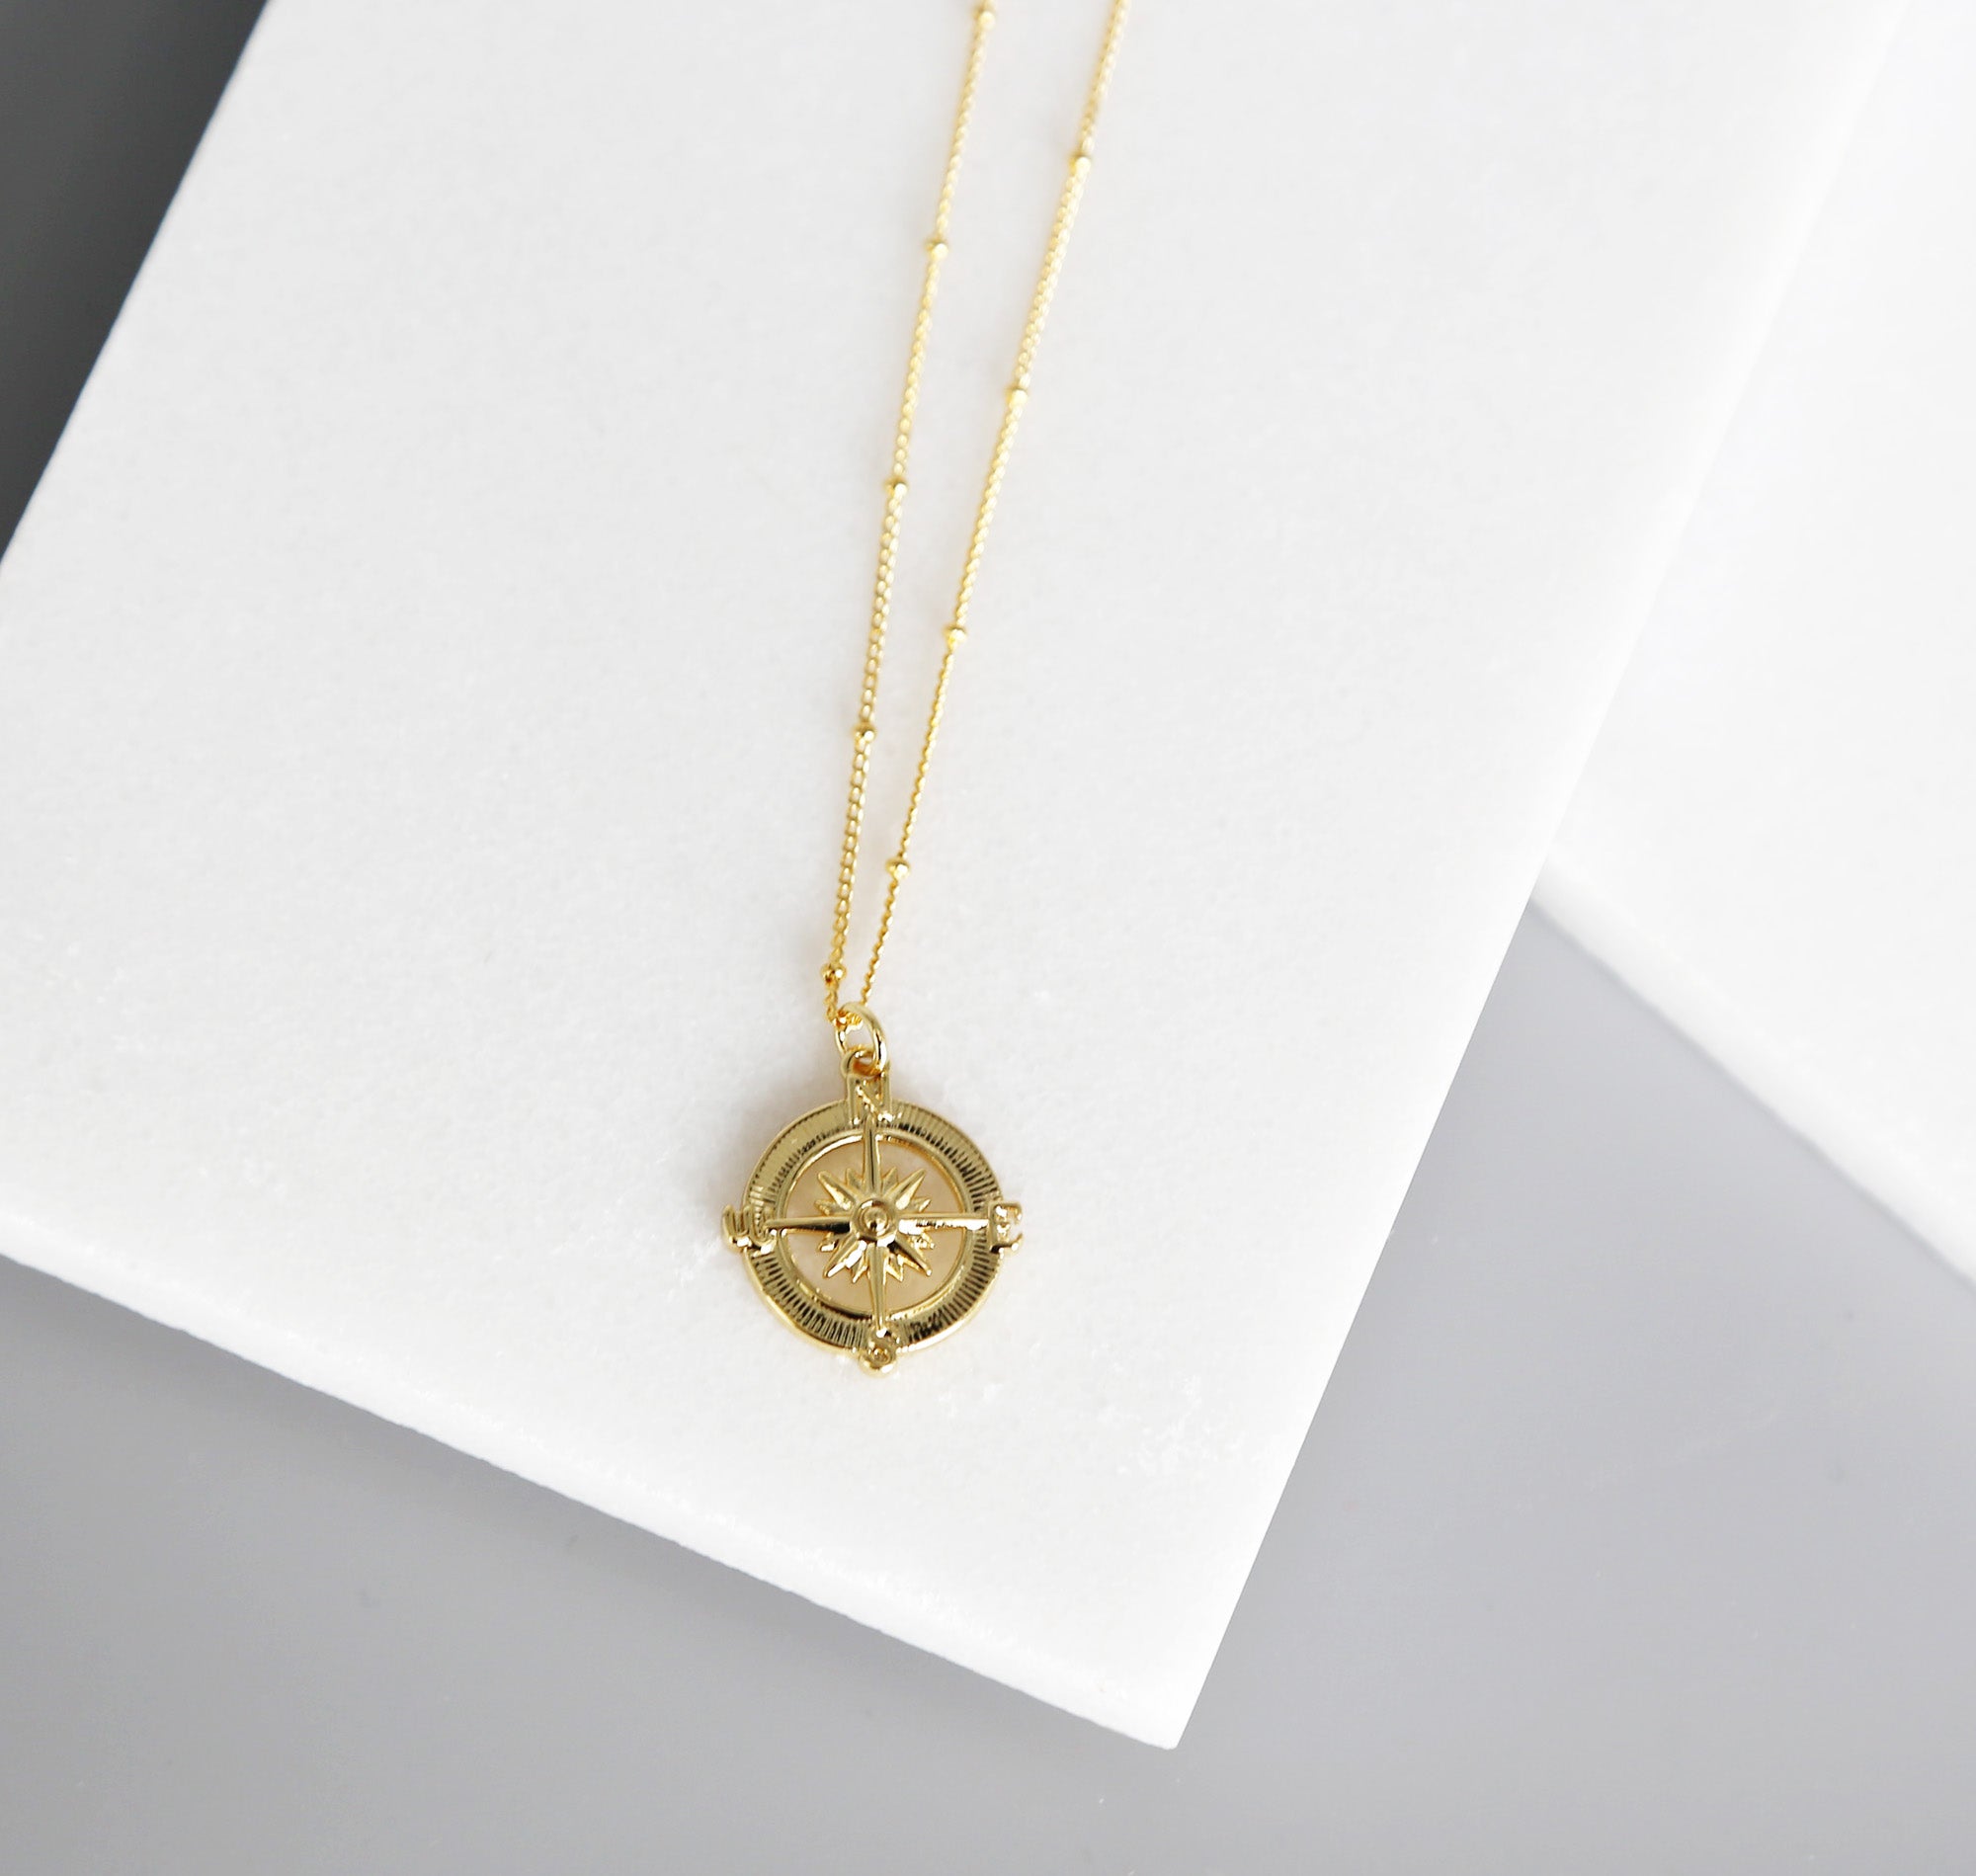 Gold Compass Necklace, Gold Necklace, Dainty Gold Jewelry, Celestial, Gold Chain, Luminous Collection